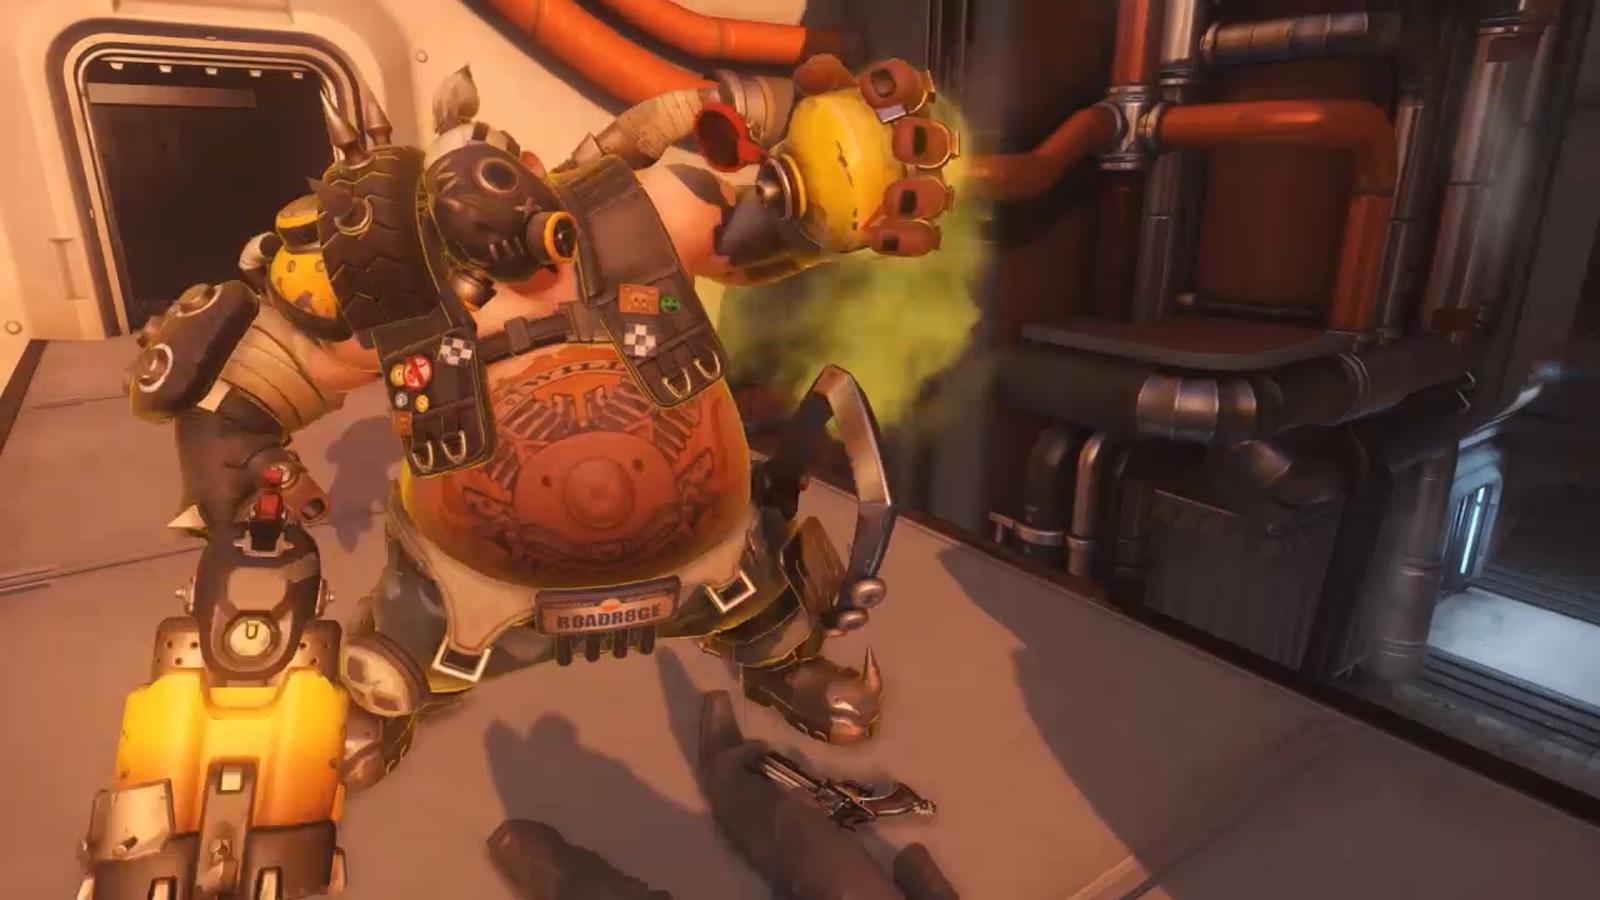 Roadhog using Take a Breather in Overwatch